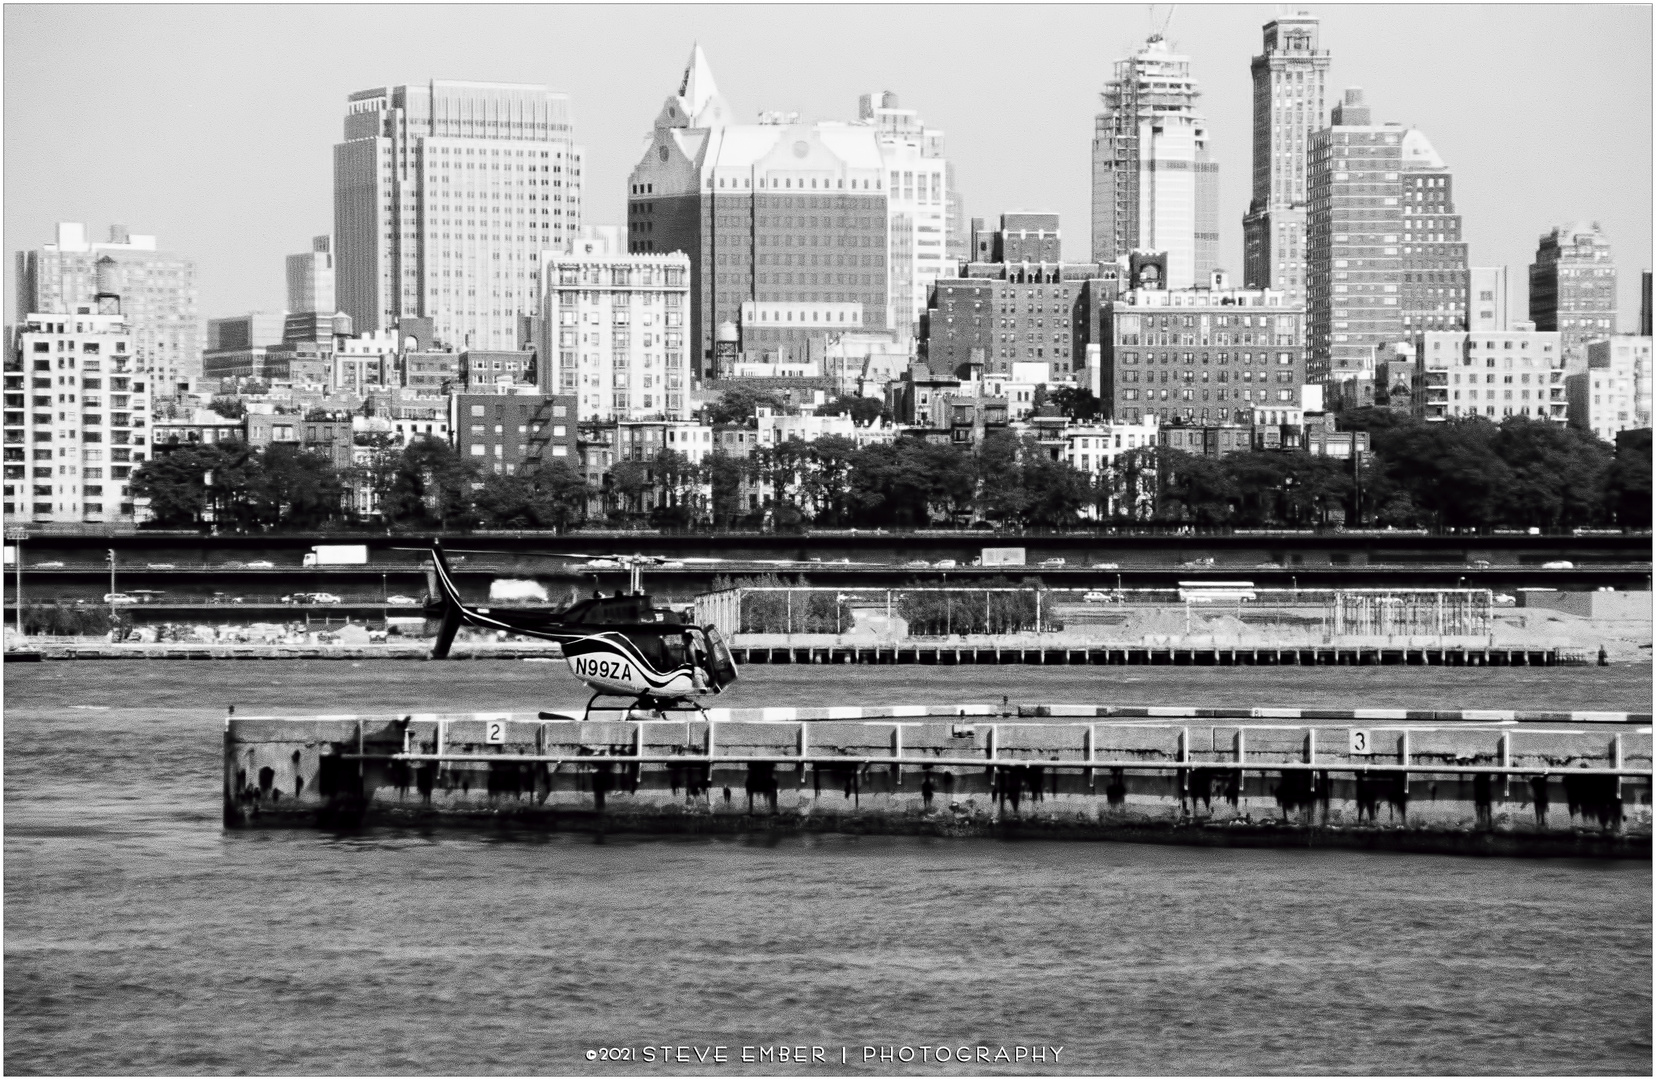 Filmic NYC No.11 - View to a Chopper and Brooklyn Heights